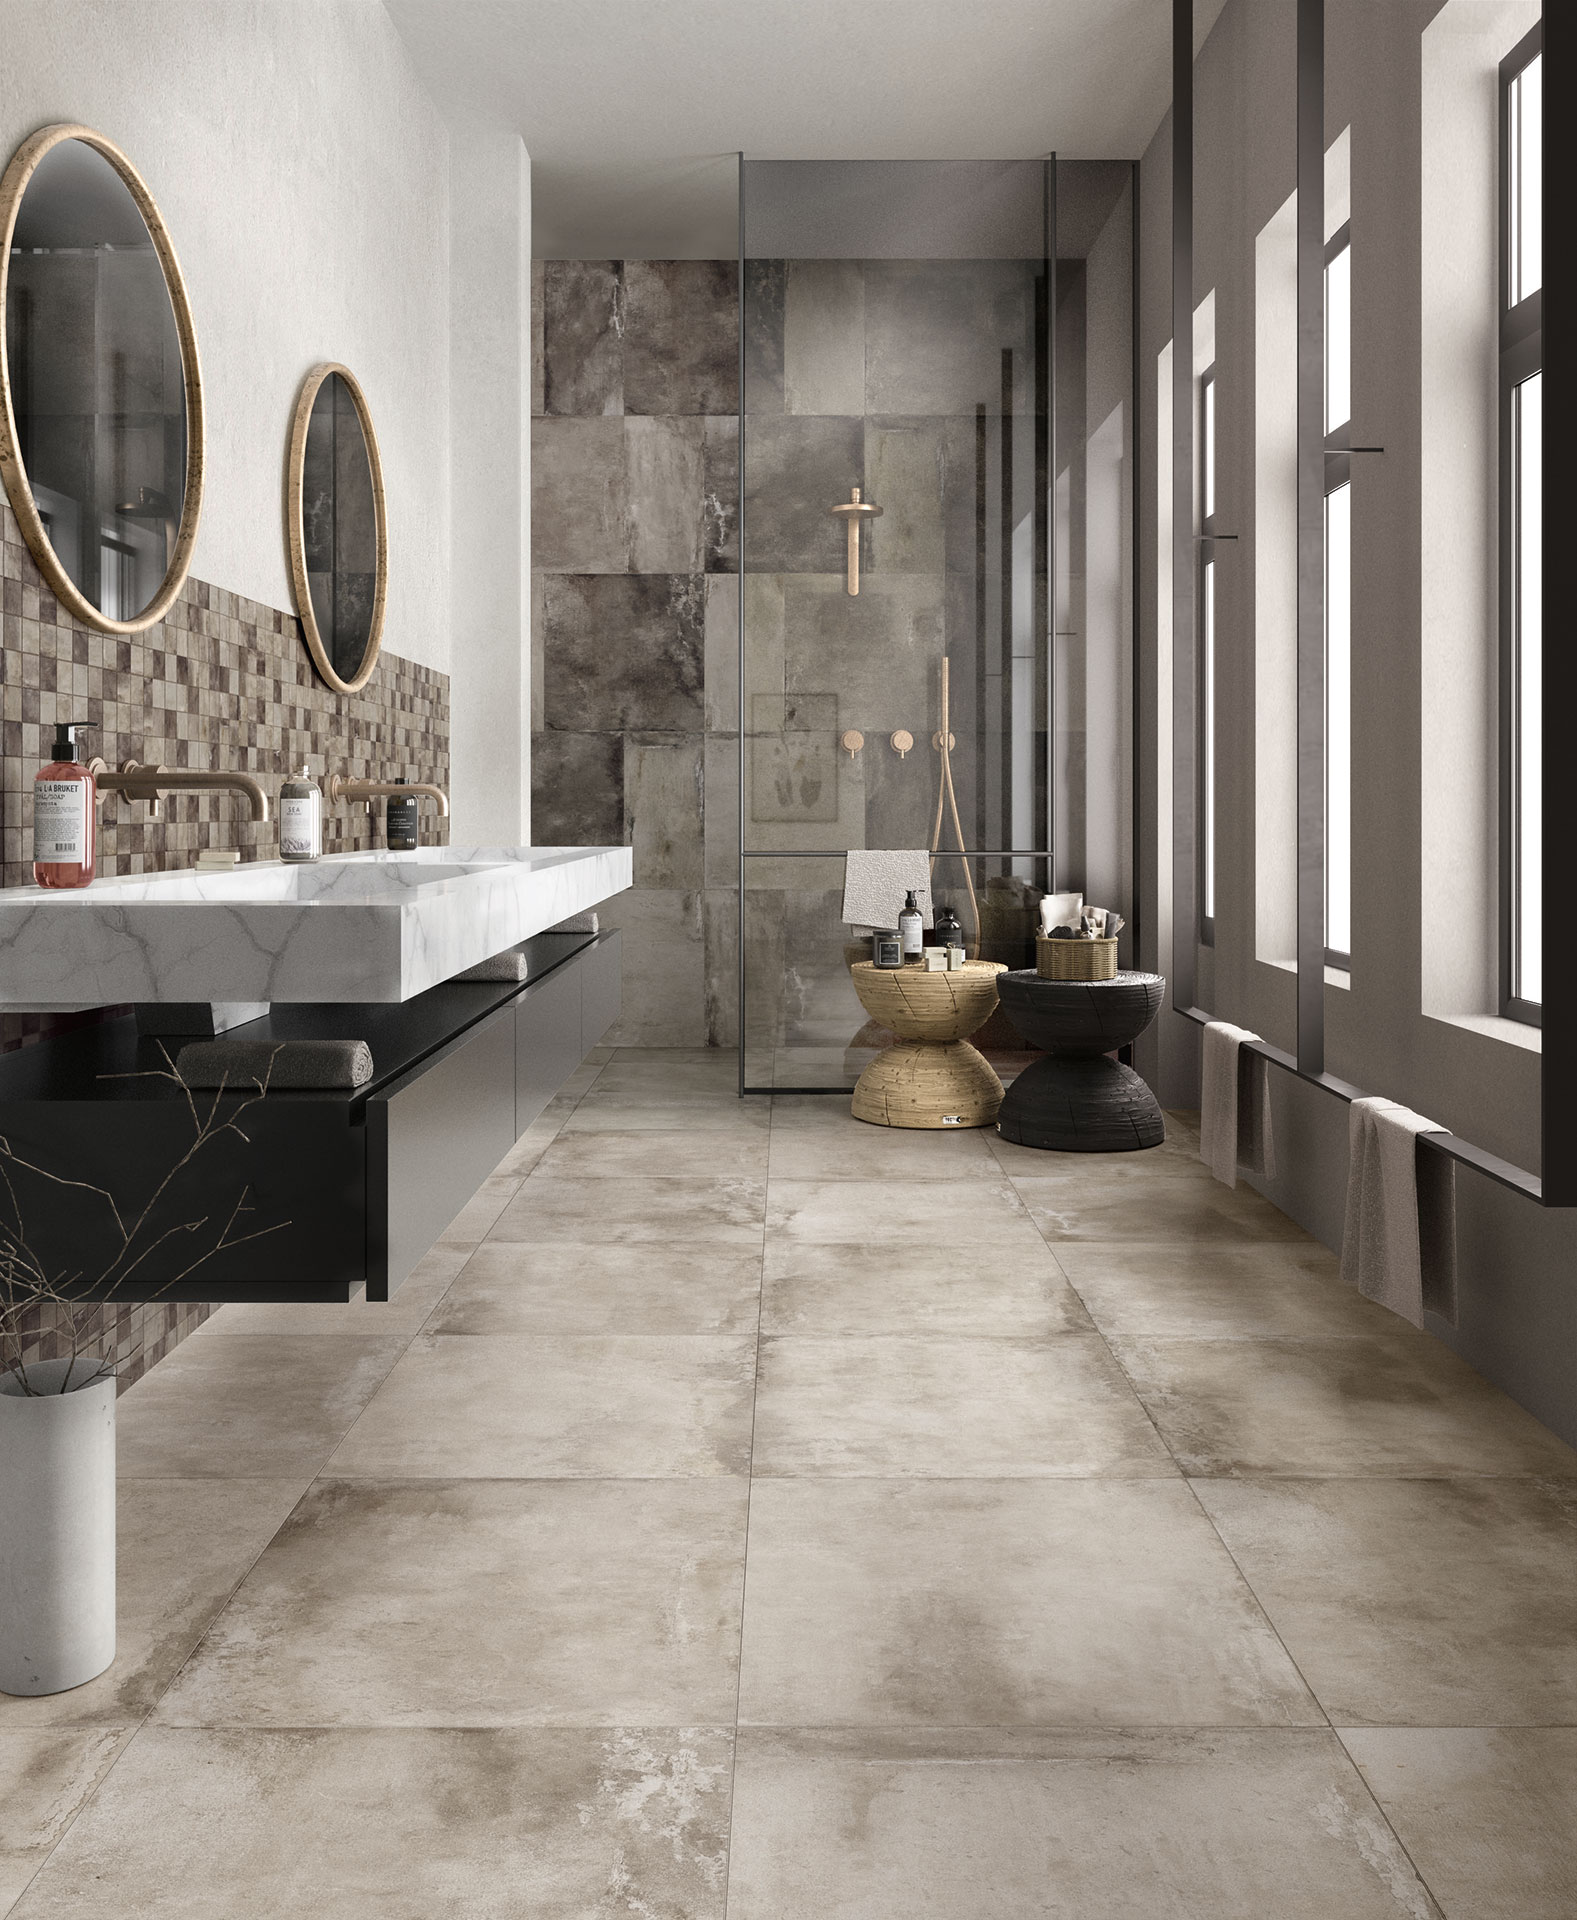 Vintagestyle ceramic solutions for today’s bathrooms